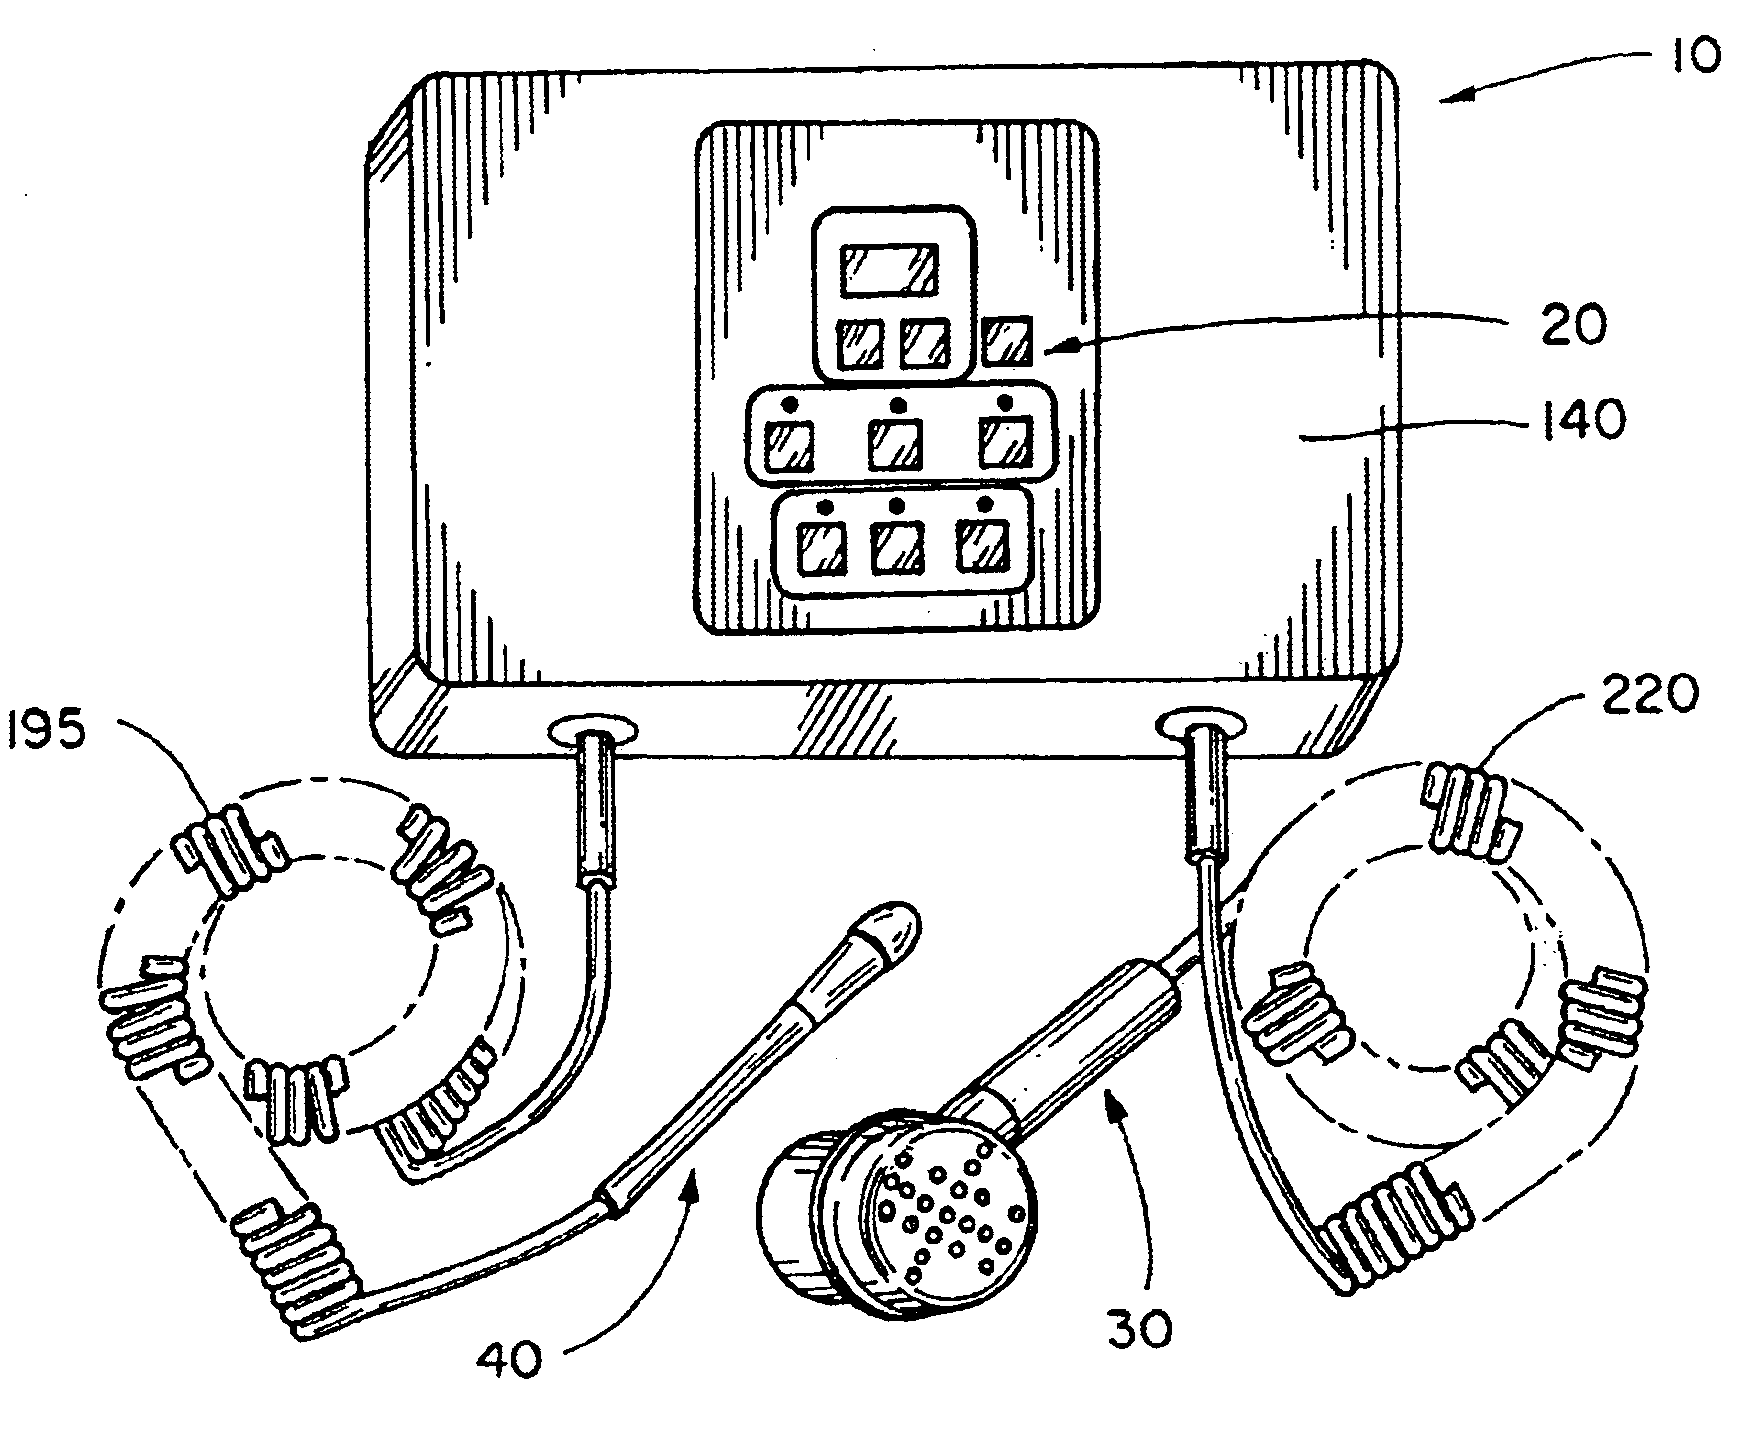 Apparatus for aesthetic skin treatments